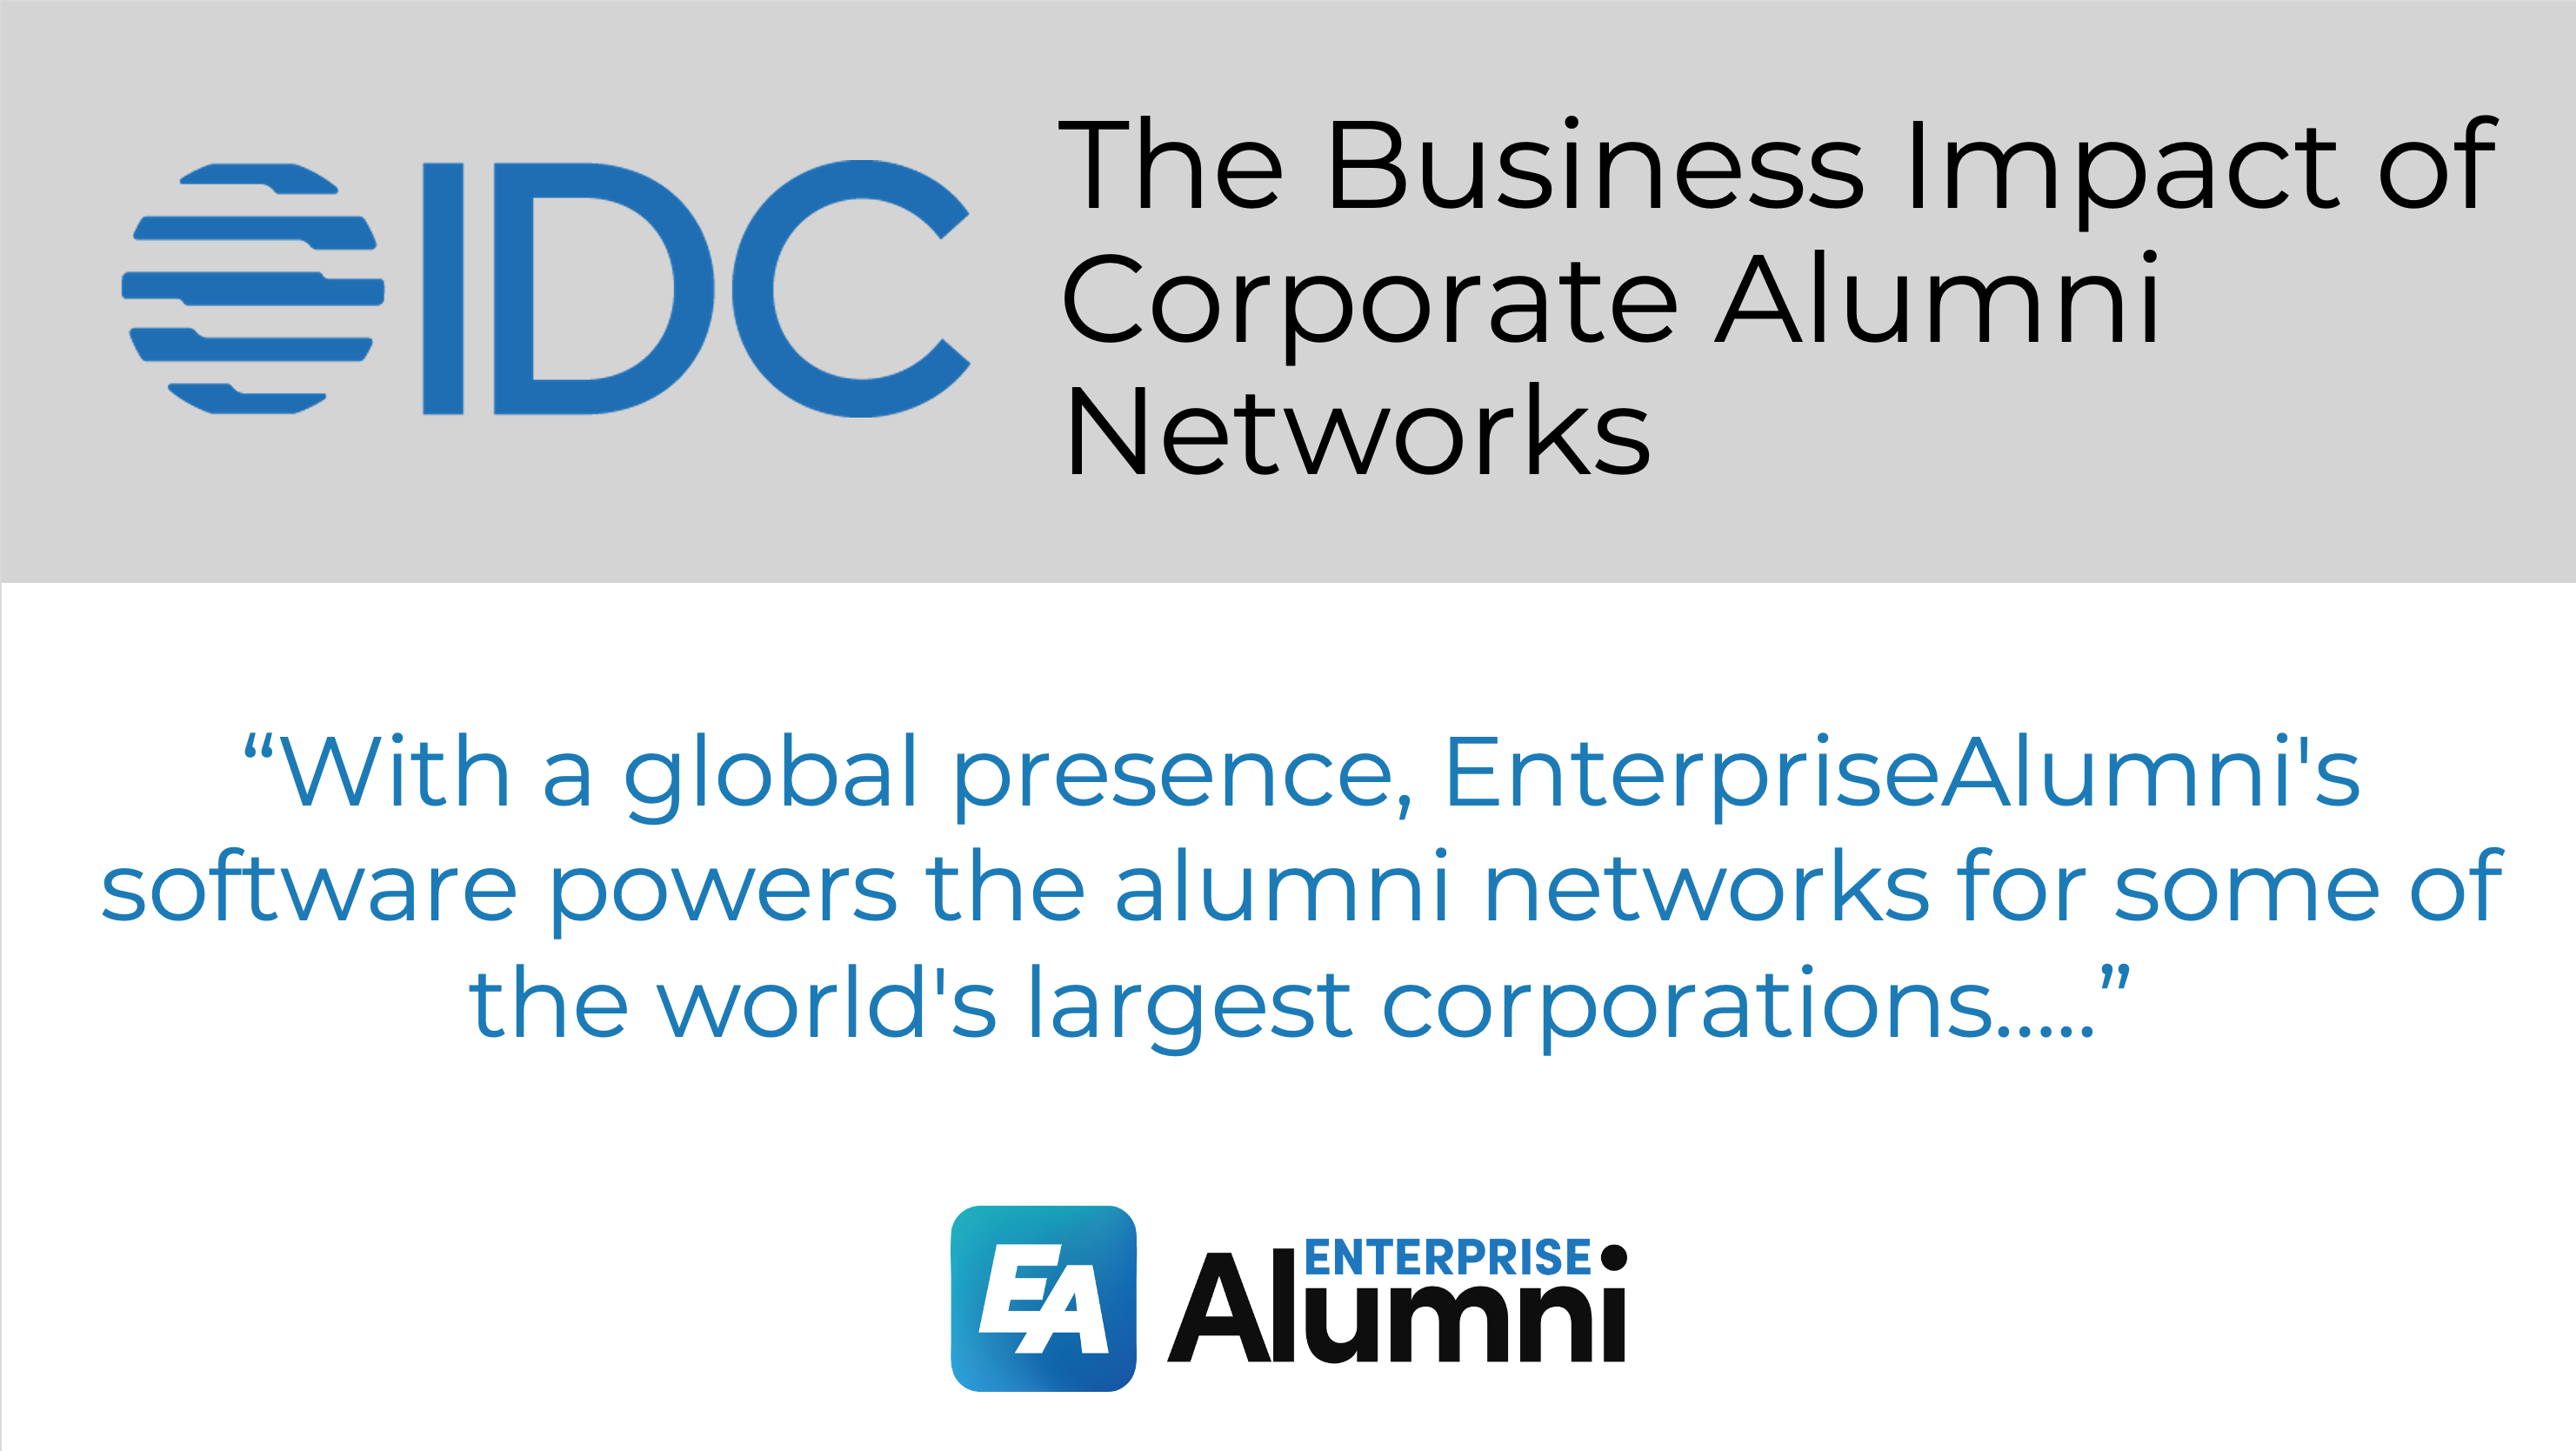 IDC Research: The Business Impact of Corporate Alumni Networks